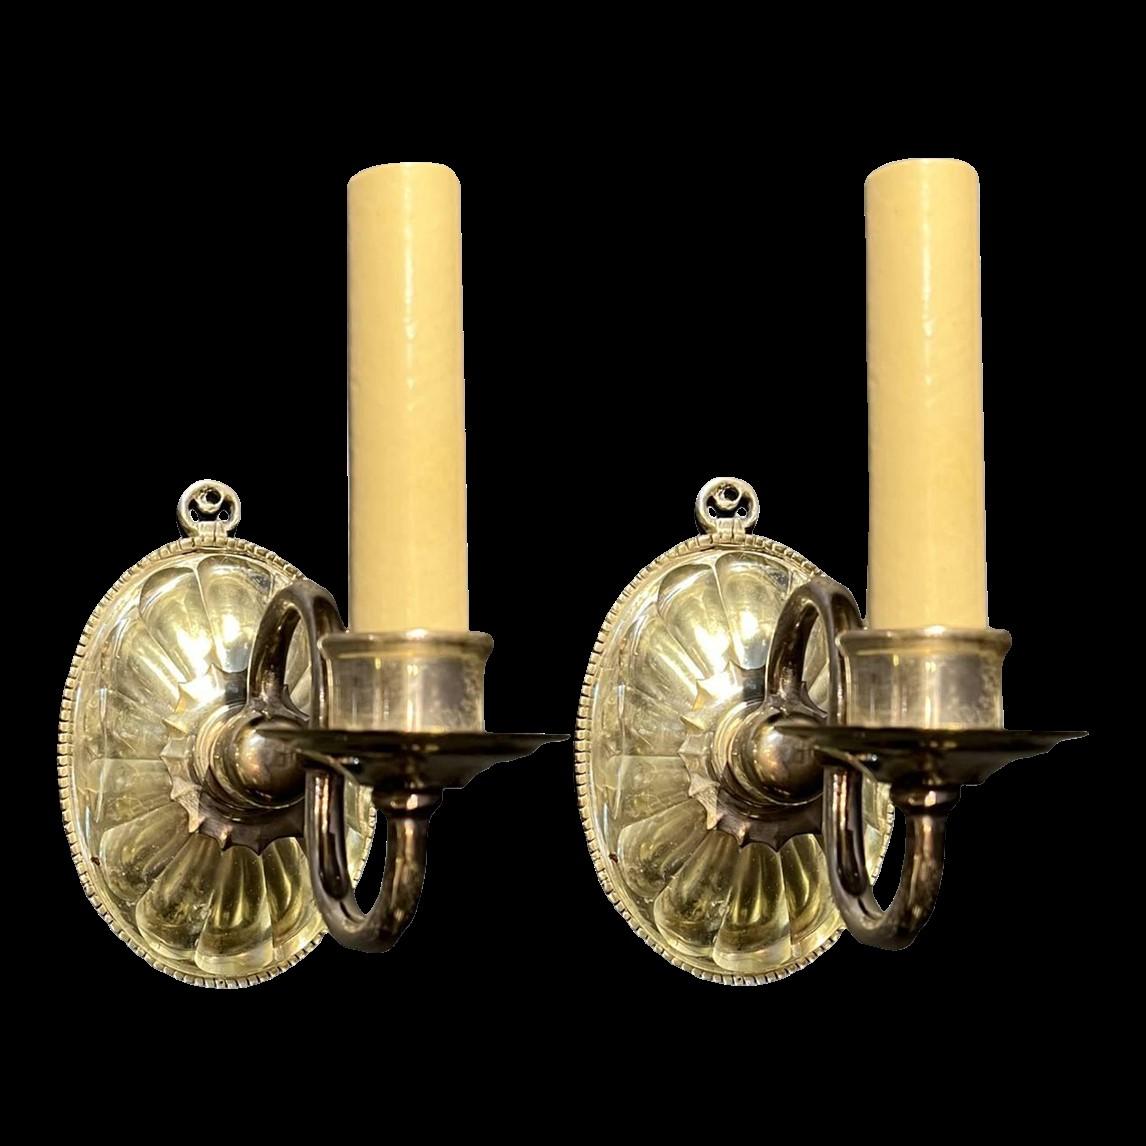 A pair of circa 1920's Caldwell silver plated one light sconces with molded glass backplate